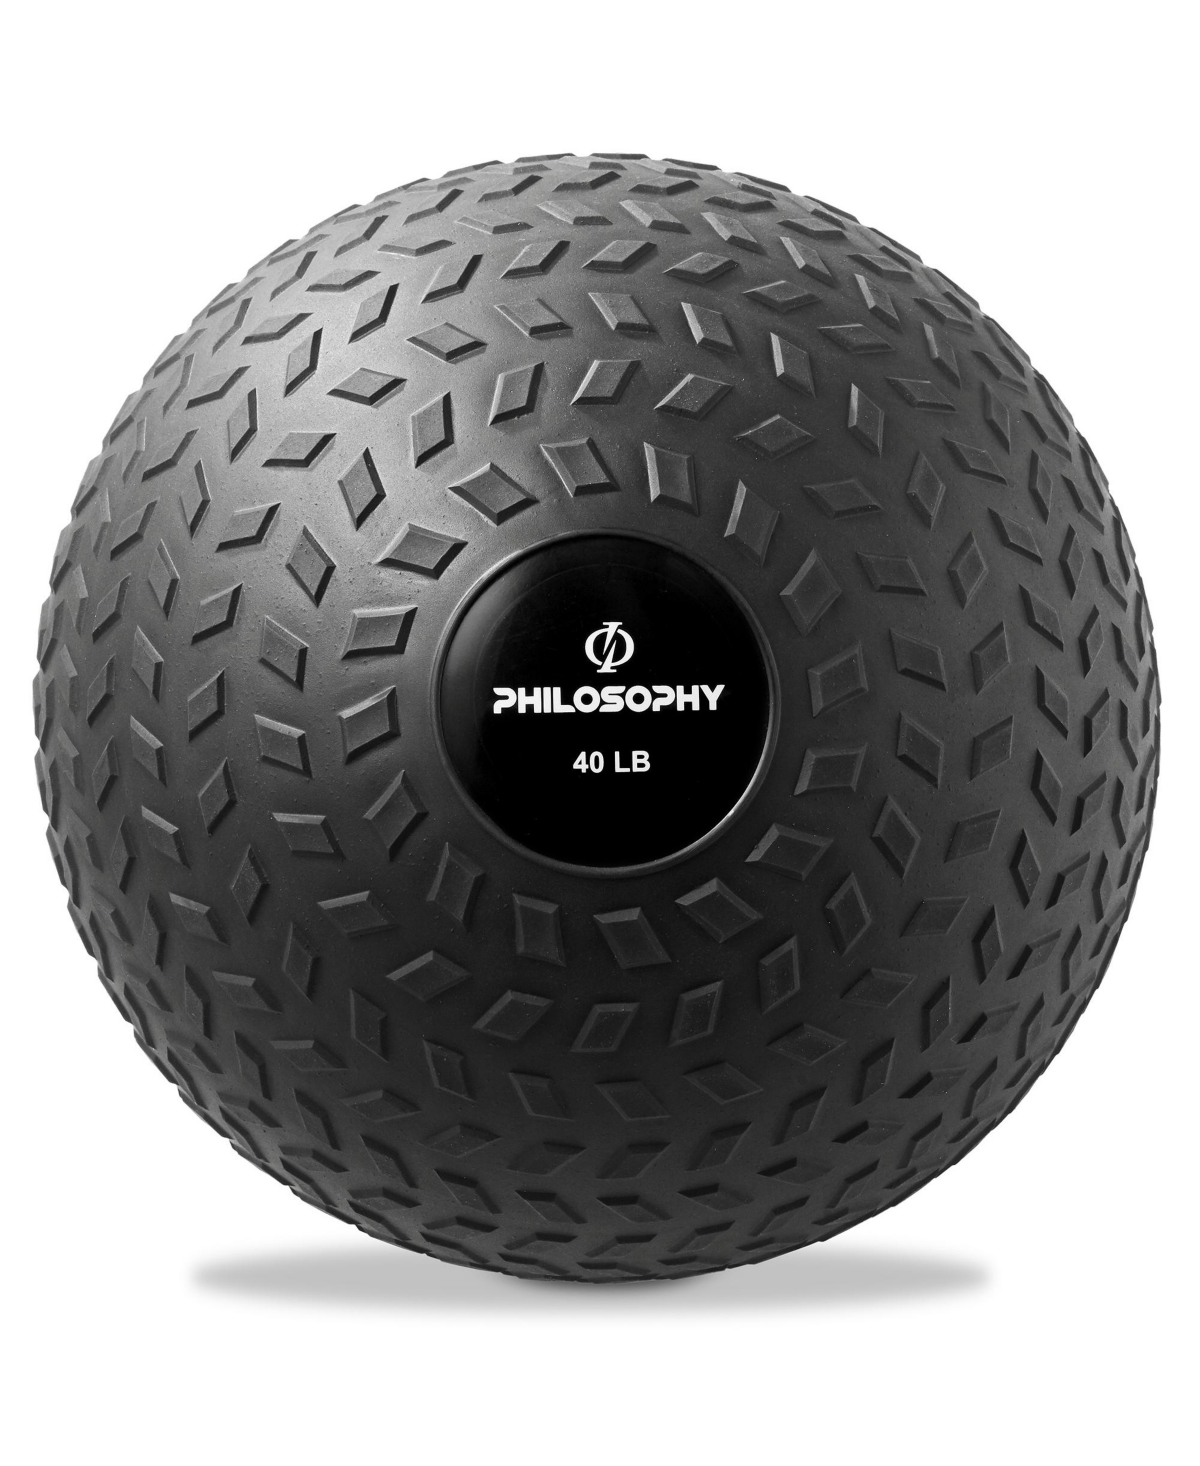 Slam Ball, 40 Lb - Weighted Fitness Medicine Ball with Easy Grip Tread - Black